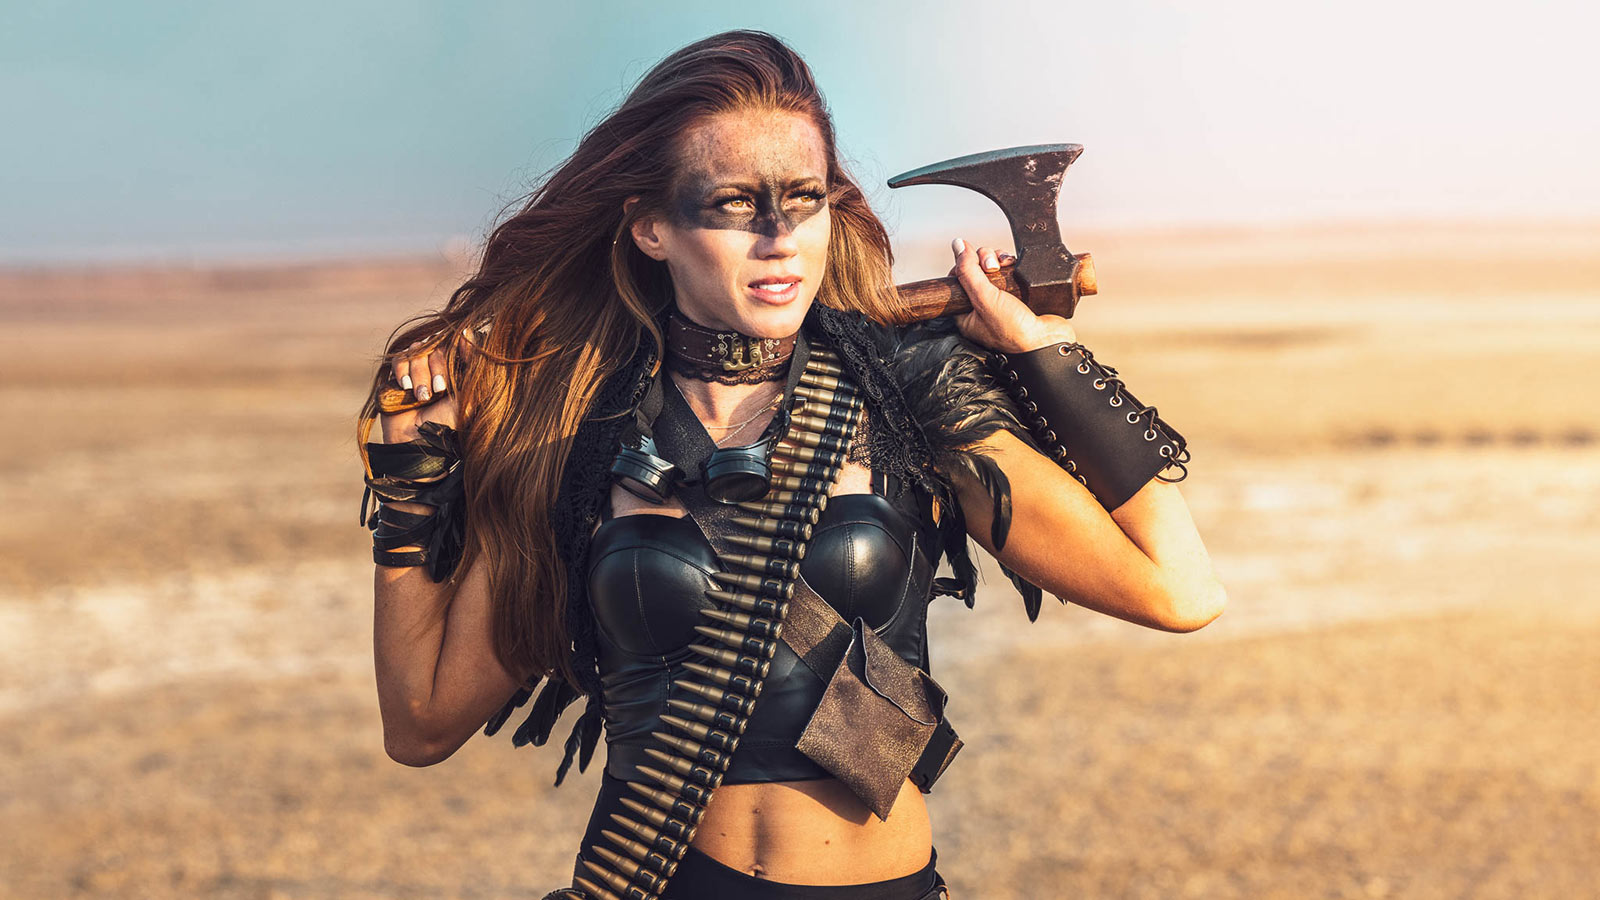 Fury Road Advertising photography series portrait